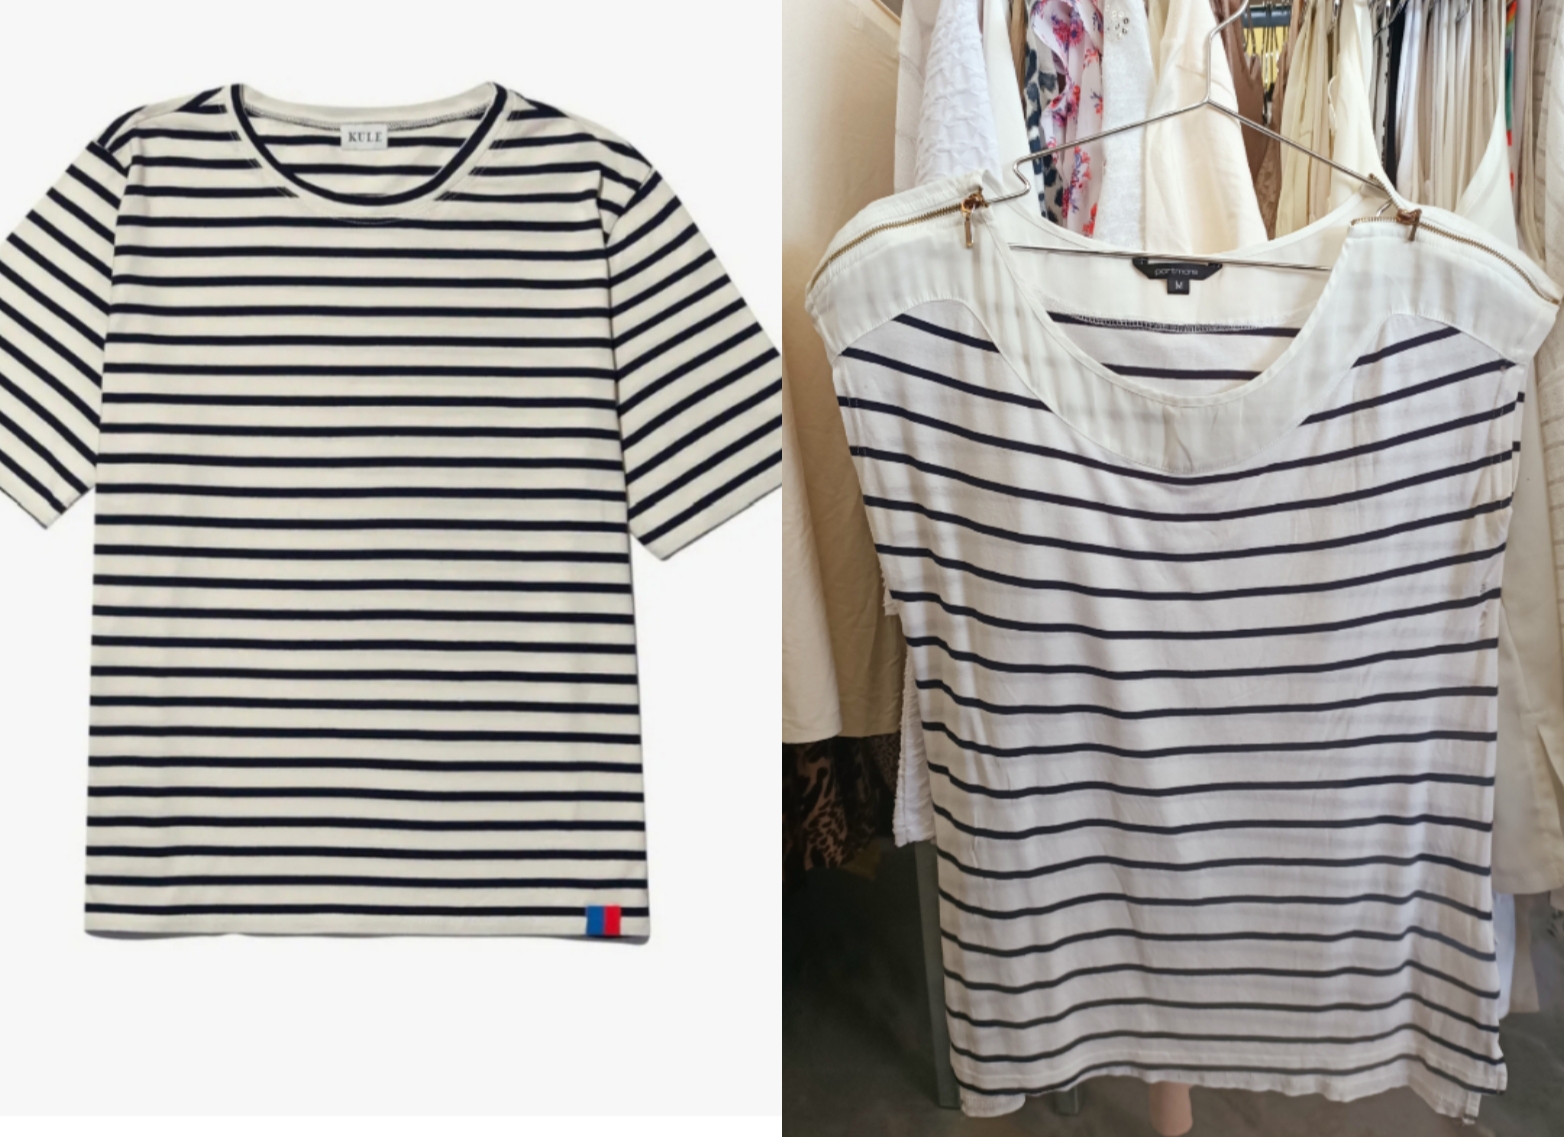 The classic striped tee